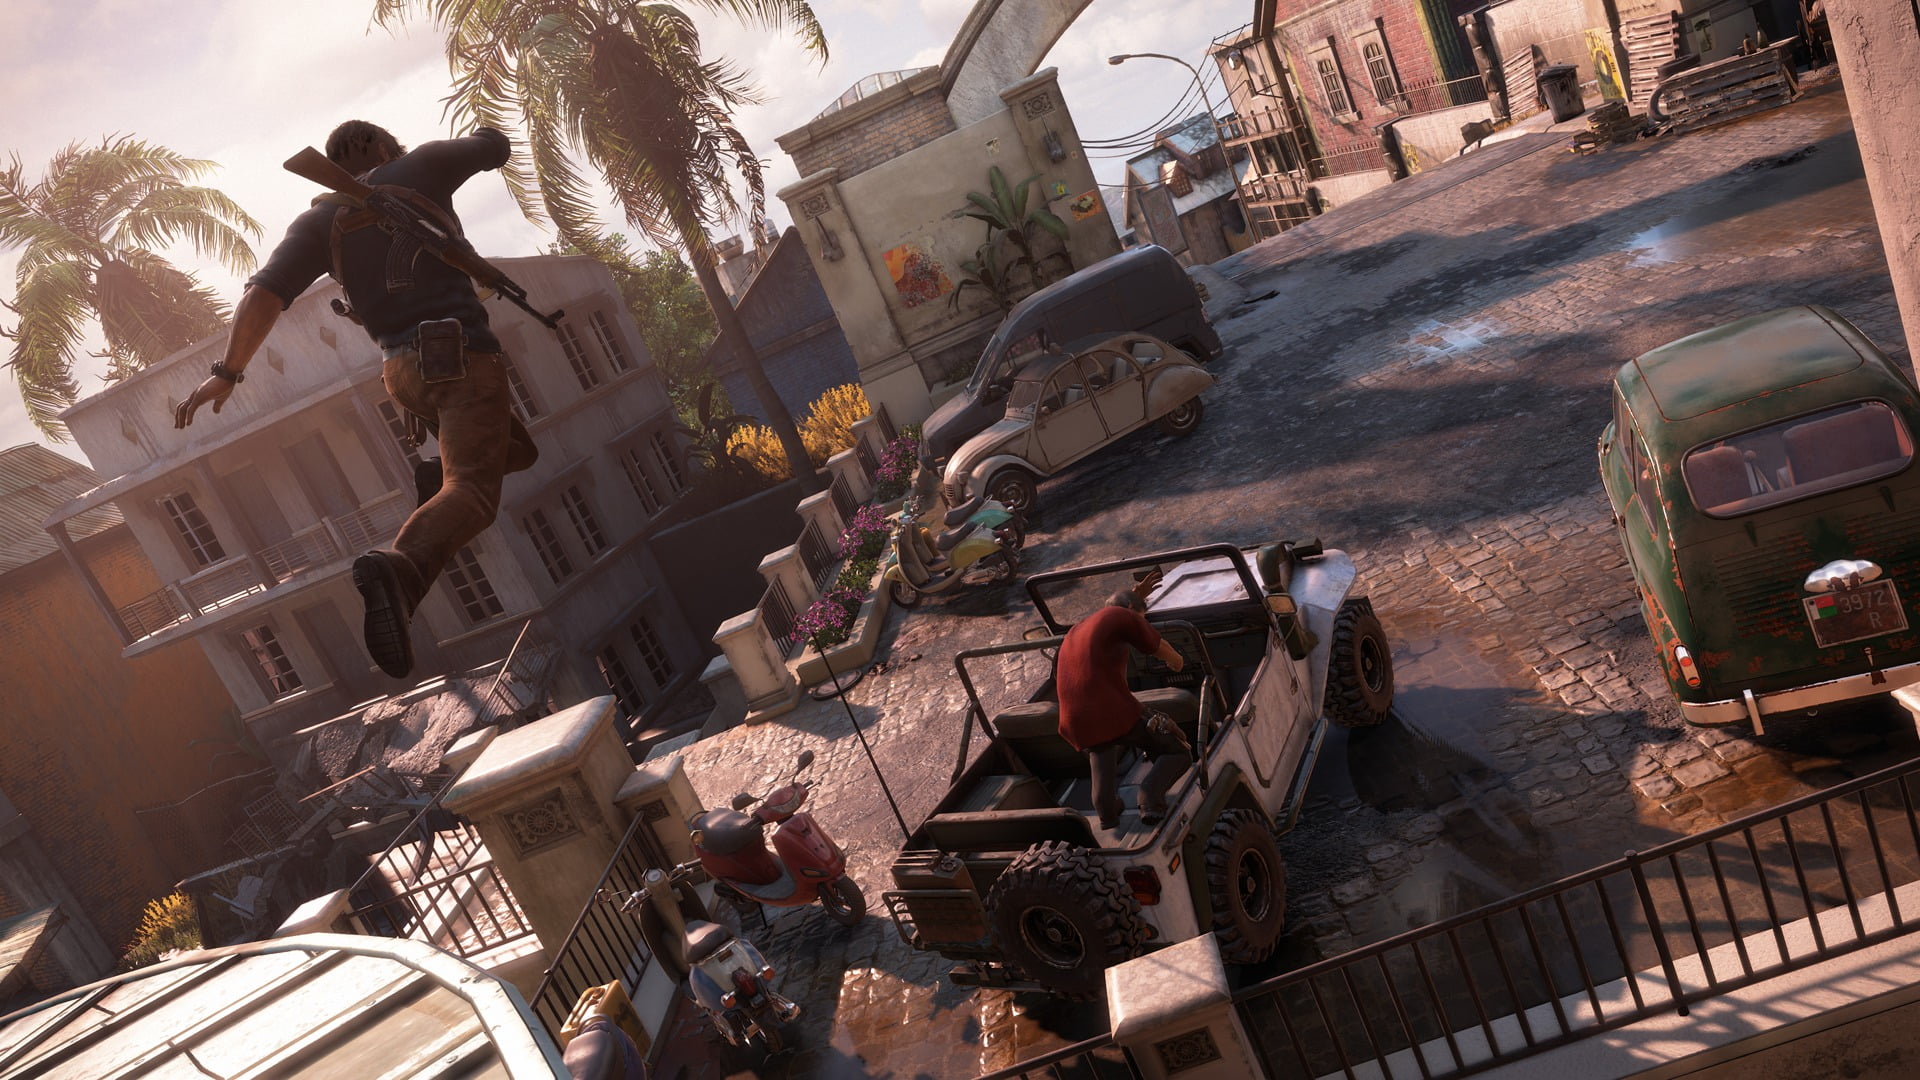 uncharted 3  pc game